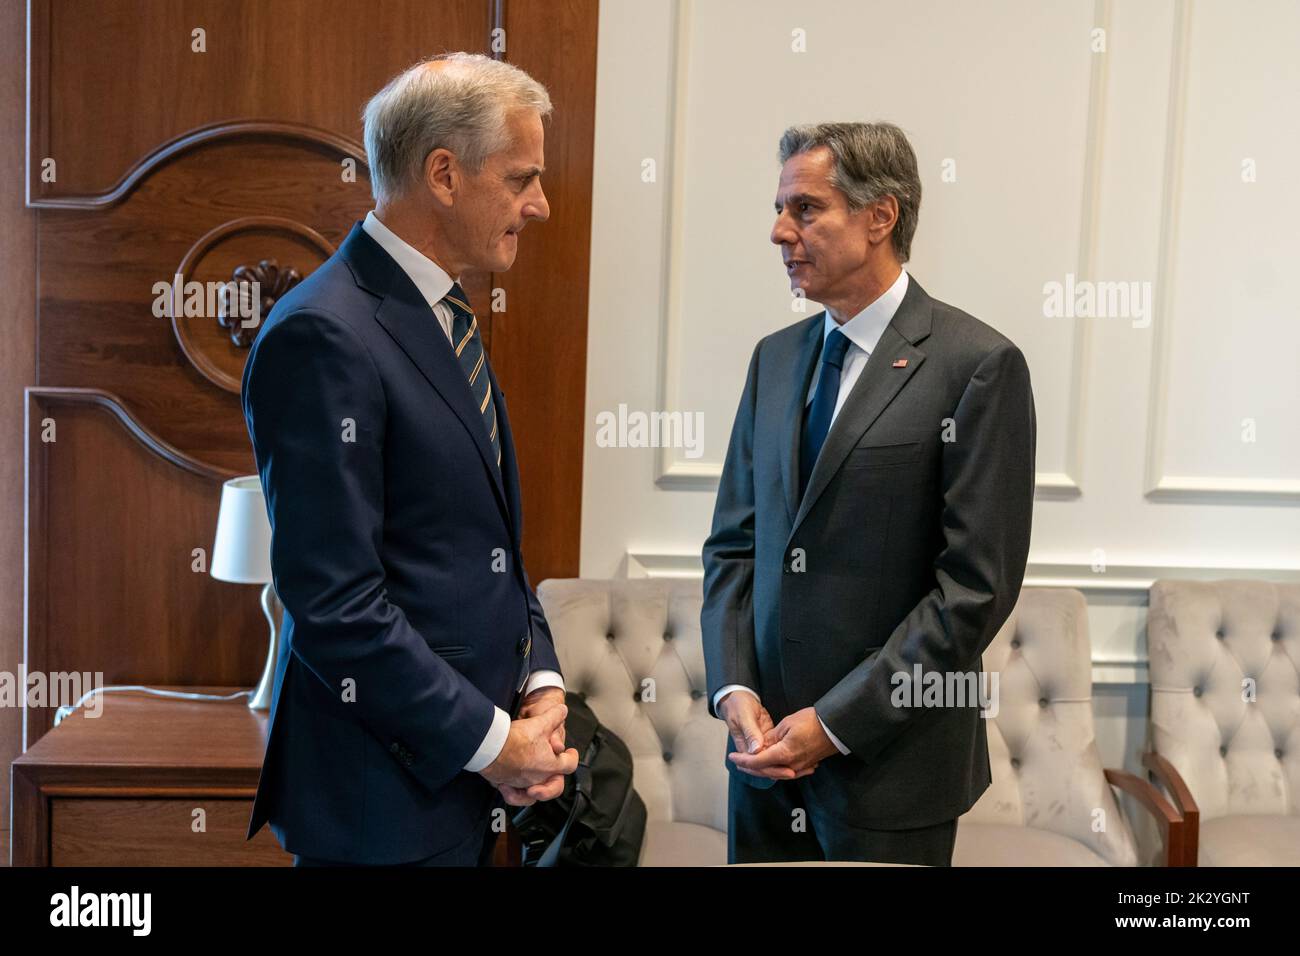 New York City, United States. 22nd Sep, 2022. U.S. Secretary of State Tony Blinken, right, speaks with Norwegian Prime Minister Jonas Gahr Støre, left, before the start of their bilateral meeting on the sidelines of the 77th Session of the U.N General Assembly, September 22, 2022, in New York City. Credit: Ron Przysucha/State Department Photo/Alamy Live News Stock Photo